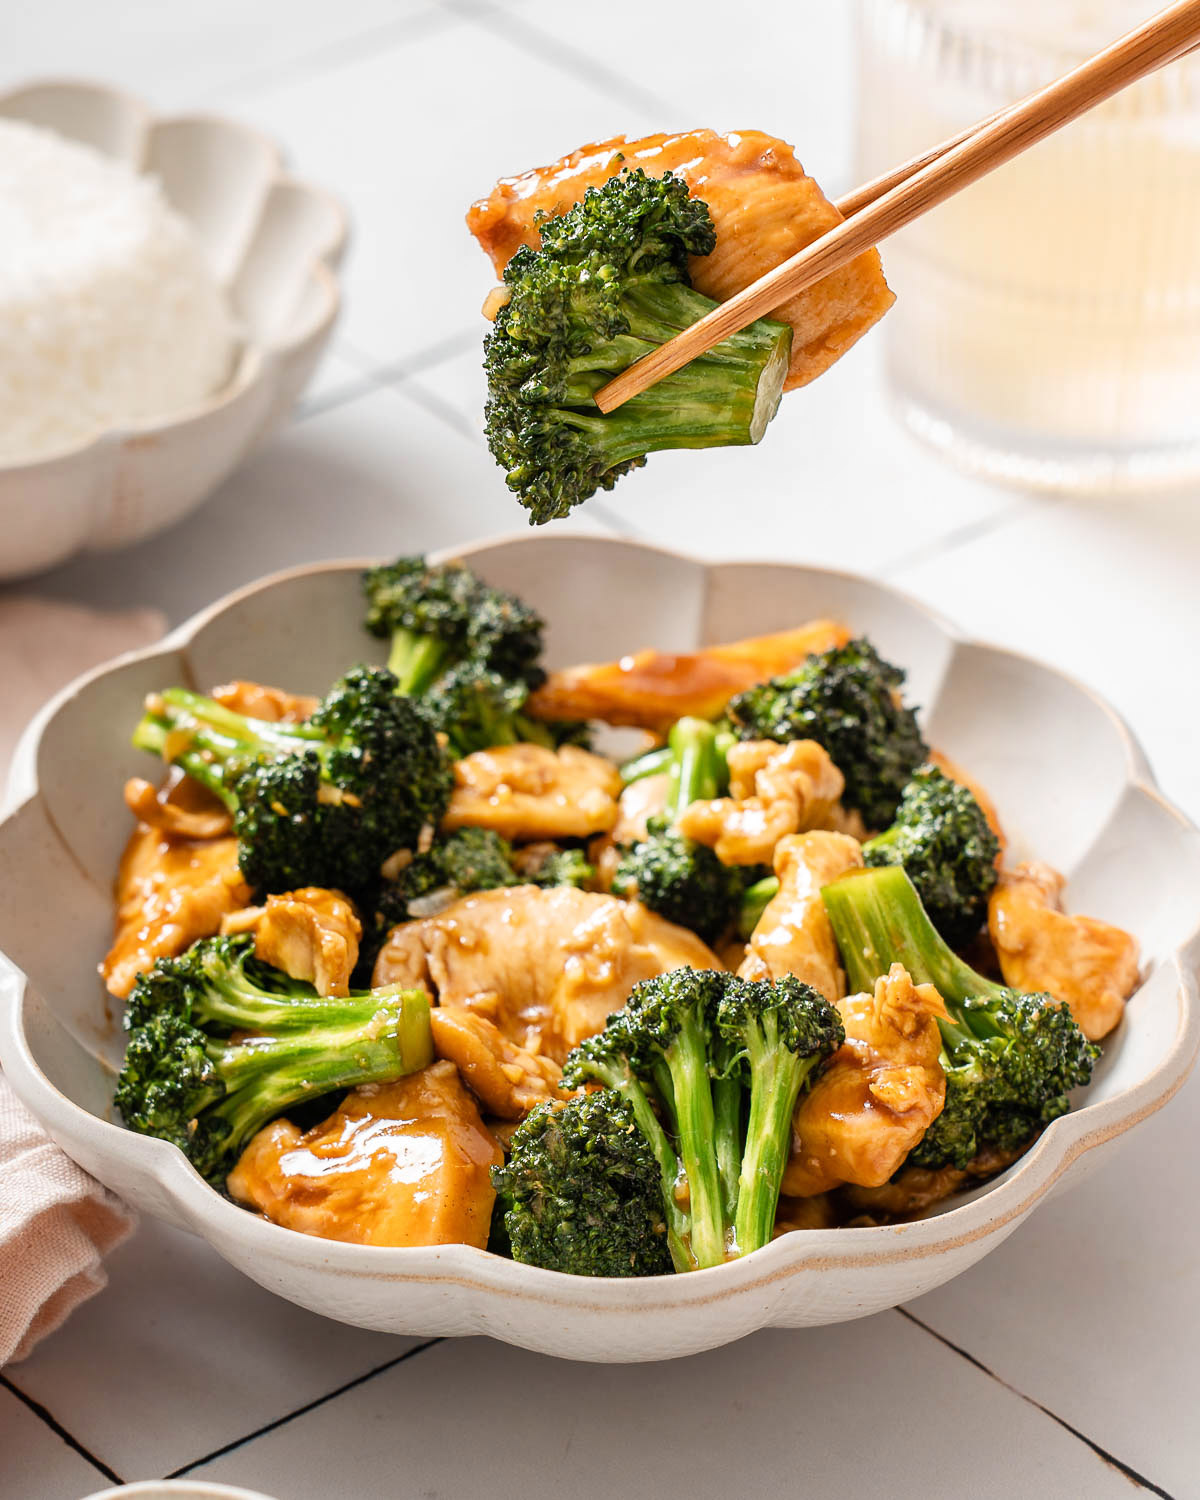 A pair of chopsticks lifting up chicken and broccoli from a bowl of Chinese chicken and broccoli.